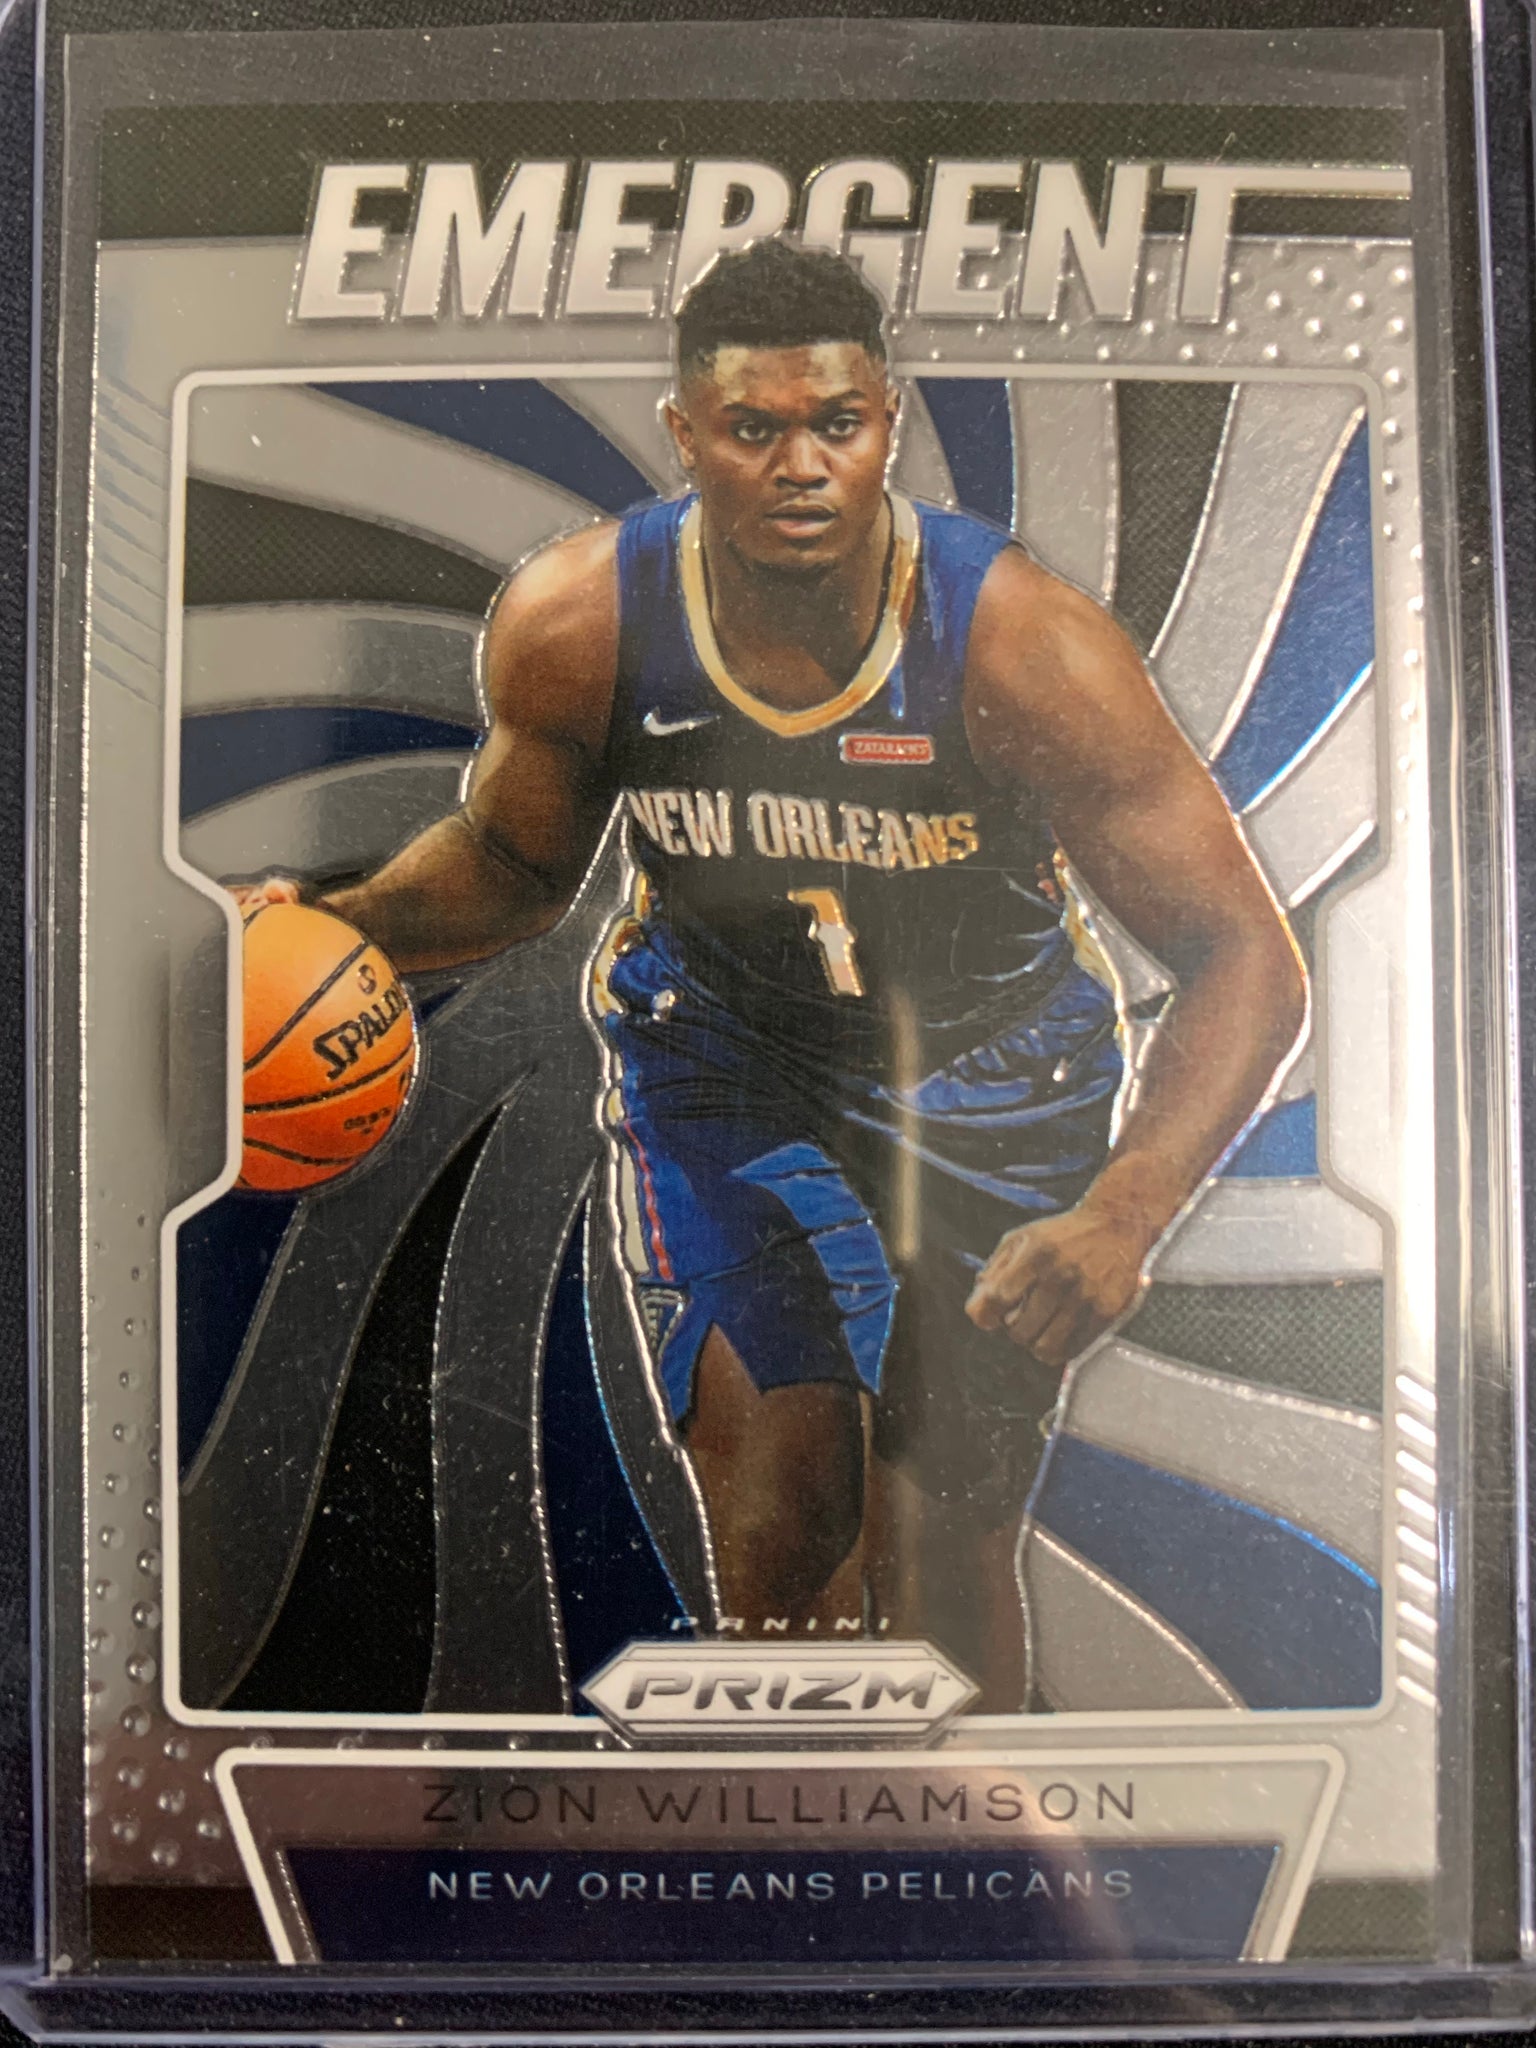 2019-20 PANINI PRIZM BASKETBALL #7 NEW ORLEANS PELICANS - ZION WILLIAMSON EMERGENT INSERT ROOKIE CARD